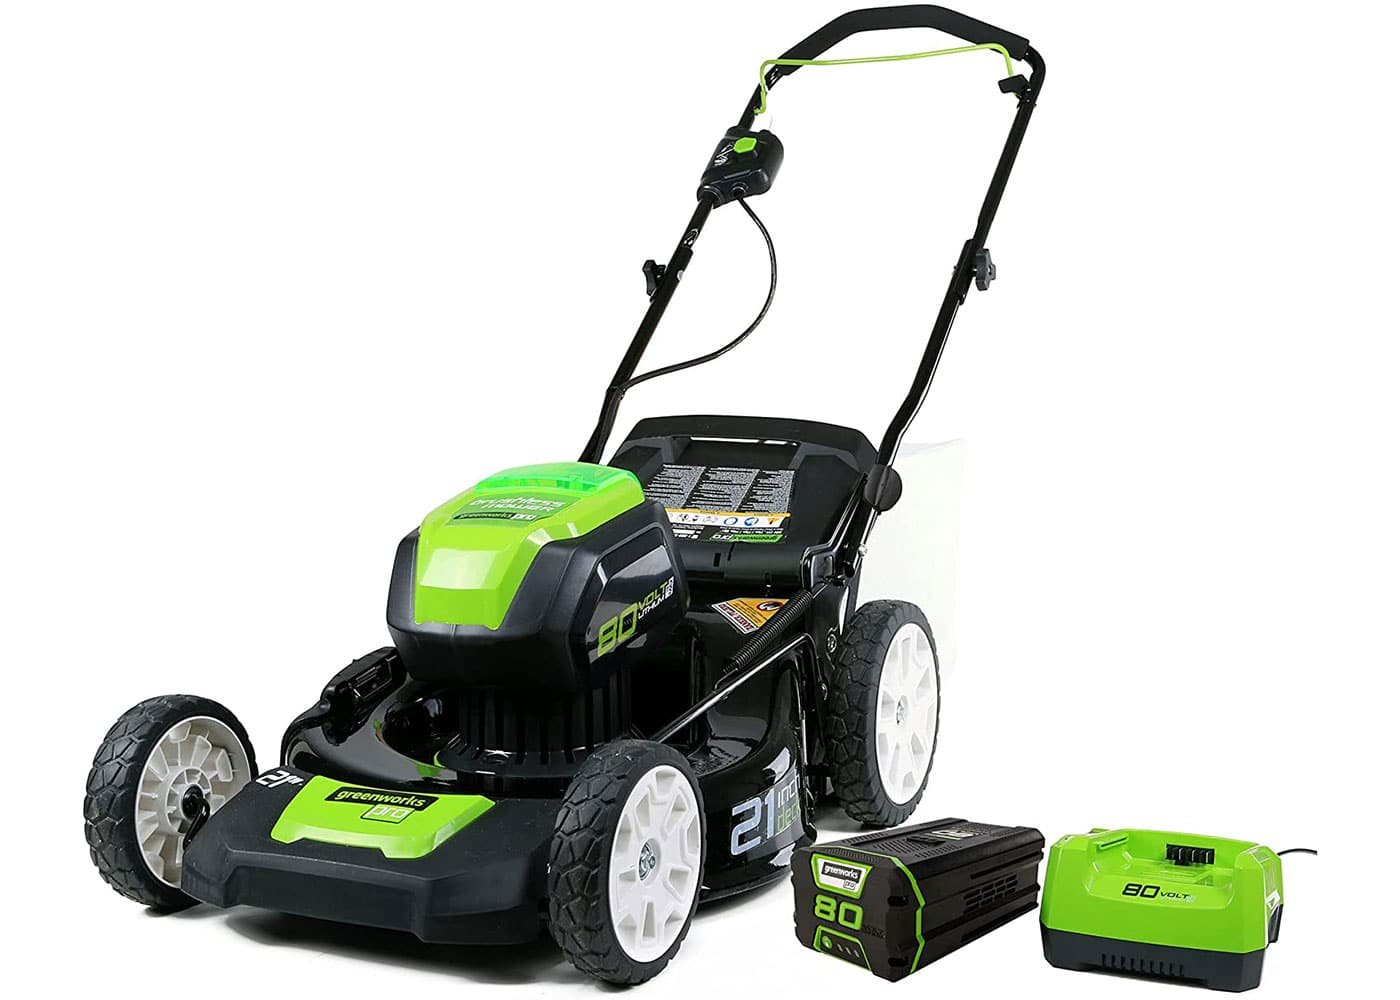 Greenworks Pro 80V 21 Inch Cordless Lawn Mower Review